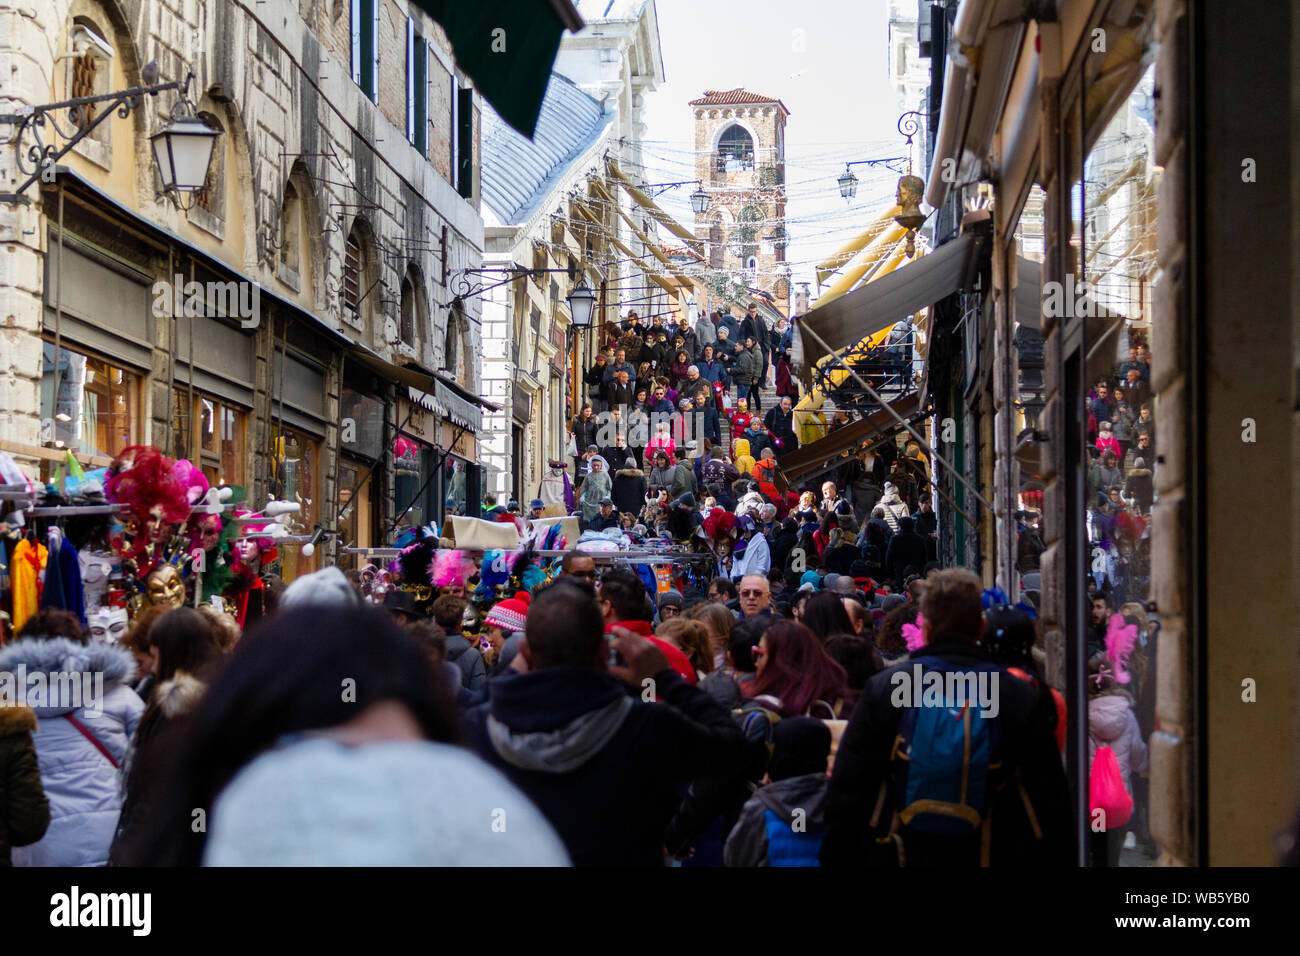 Crowded streets of Venice during Carnival. Stock Photo